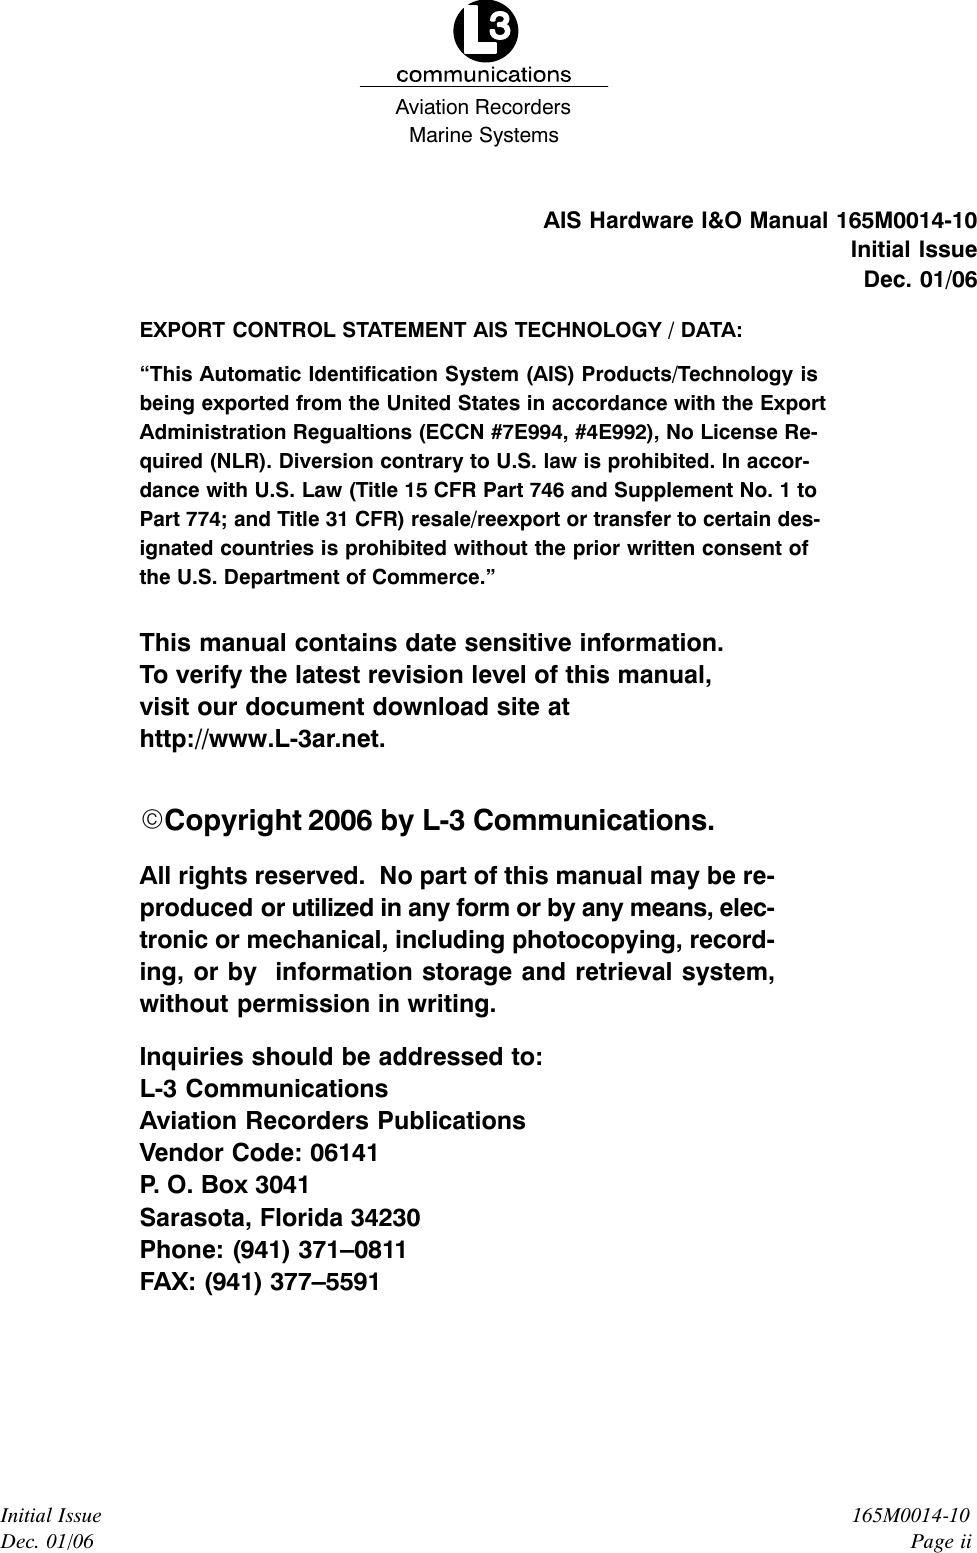 Marine SystemsAviation RecordersInitial IssueDec. 01/06165M0014-10Page iiAIS Hardware I&amp;O Manual 165M0014-10Initial IssueDec. 01/06EXPORT CONTROL STATEMENT AIS TECHNOLOGY / DATA:“This Automatic Identification System (AIS) Products/Technology isbeing exported from the United States in accordance with the ExportAdministration Regualtions (ECCN #7E994, #4E992), No License Re-quired (NLR). Diversion contrary to U.S. law is prohibited. In accor-dance with U.S. Law (Title 15 CFR Part 746 and Supplement No. 1 toPart 774; and Title 31 CFR) resale/reexport or transfer to certain des-ignated countries is prohibited without the prior written consent ofthe U.S. Department of Commerce.”This manual contains date sensitive information.To verify the latest revision level of this manual,visit our document download site athttp://www.L-3ar.net.ECopyright 2006 by L-3 Communications.All rights reserved.  No part of this manual may be re-produced or utilized in any form or by any means, elec-tronic or mechanical, including photocopying, record-ing, or by  information storage and retrieval system,without permission in writing.Inquiries should be addressed to:L-3 CommunicationsAviation Recorders PublicationsVendor Code: 06141P. O. Box 3041Sarasota, Florida 34230Phone: (941) 371–0811FAX: (941) 377–5591